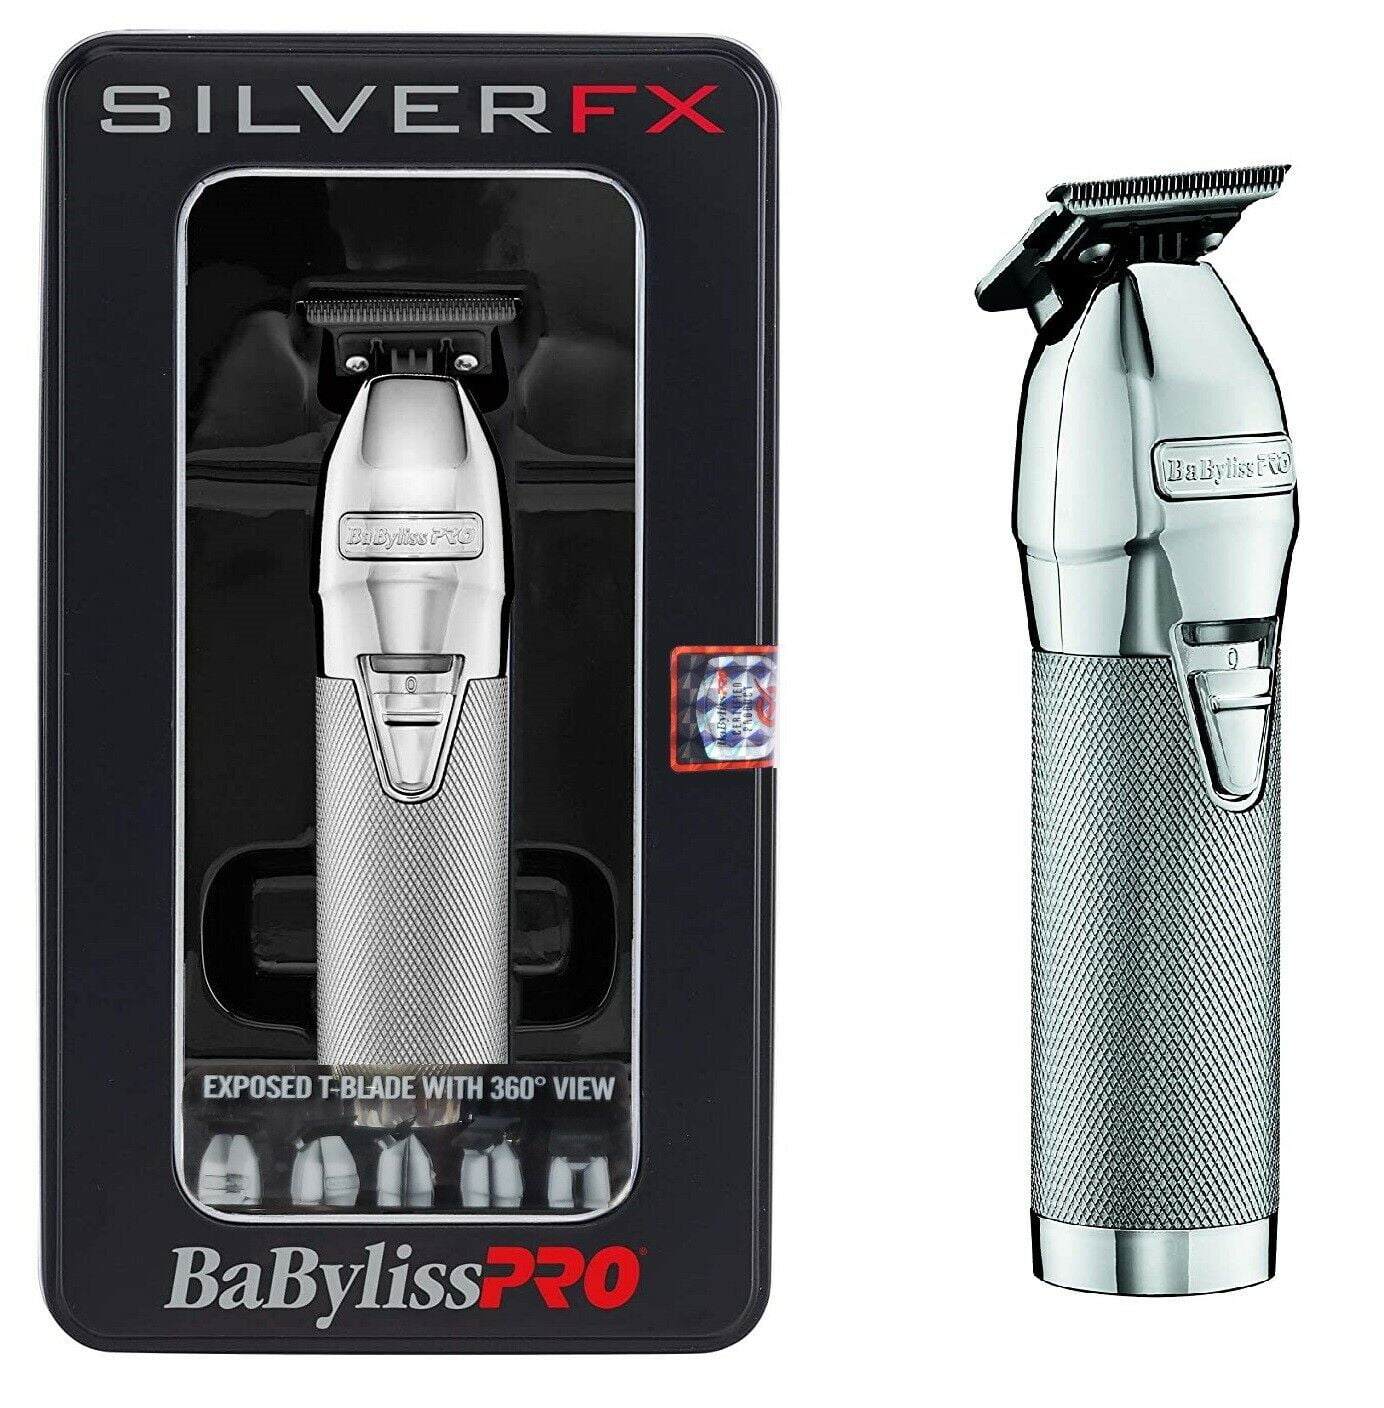 BaByliss PRO FX787 Silver FX Skeleton Exposed T-Blade Cordless Trimmer  BRAND NEW